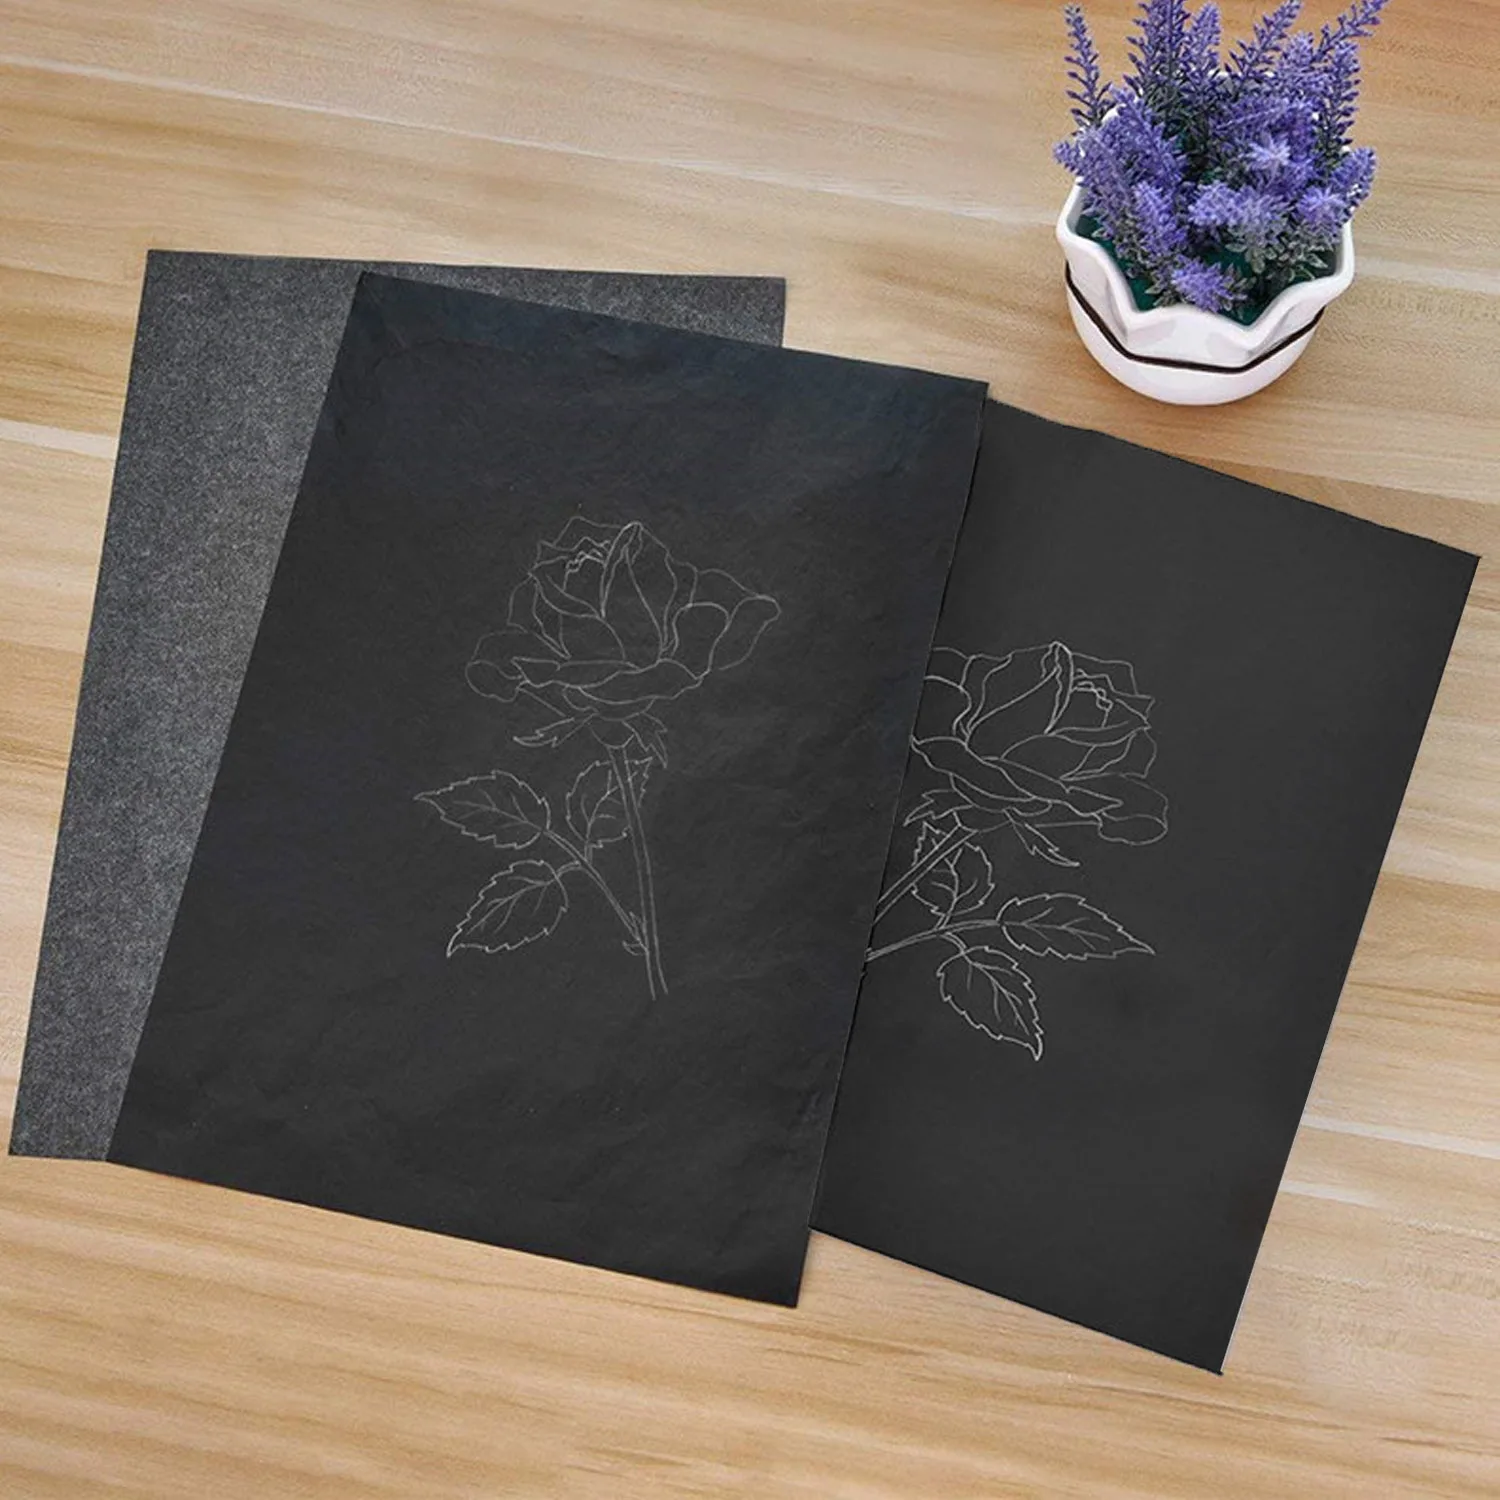 100 Sheet A4 Size Reusable Carbon Tracing Transfer Paper for Office School Home Canvas Wood Glass Metal Ceramic